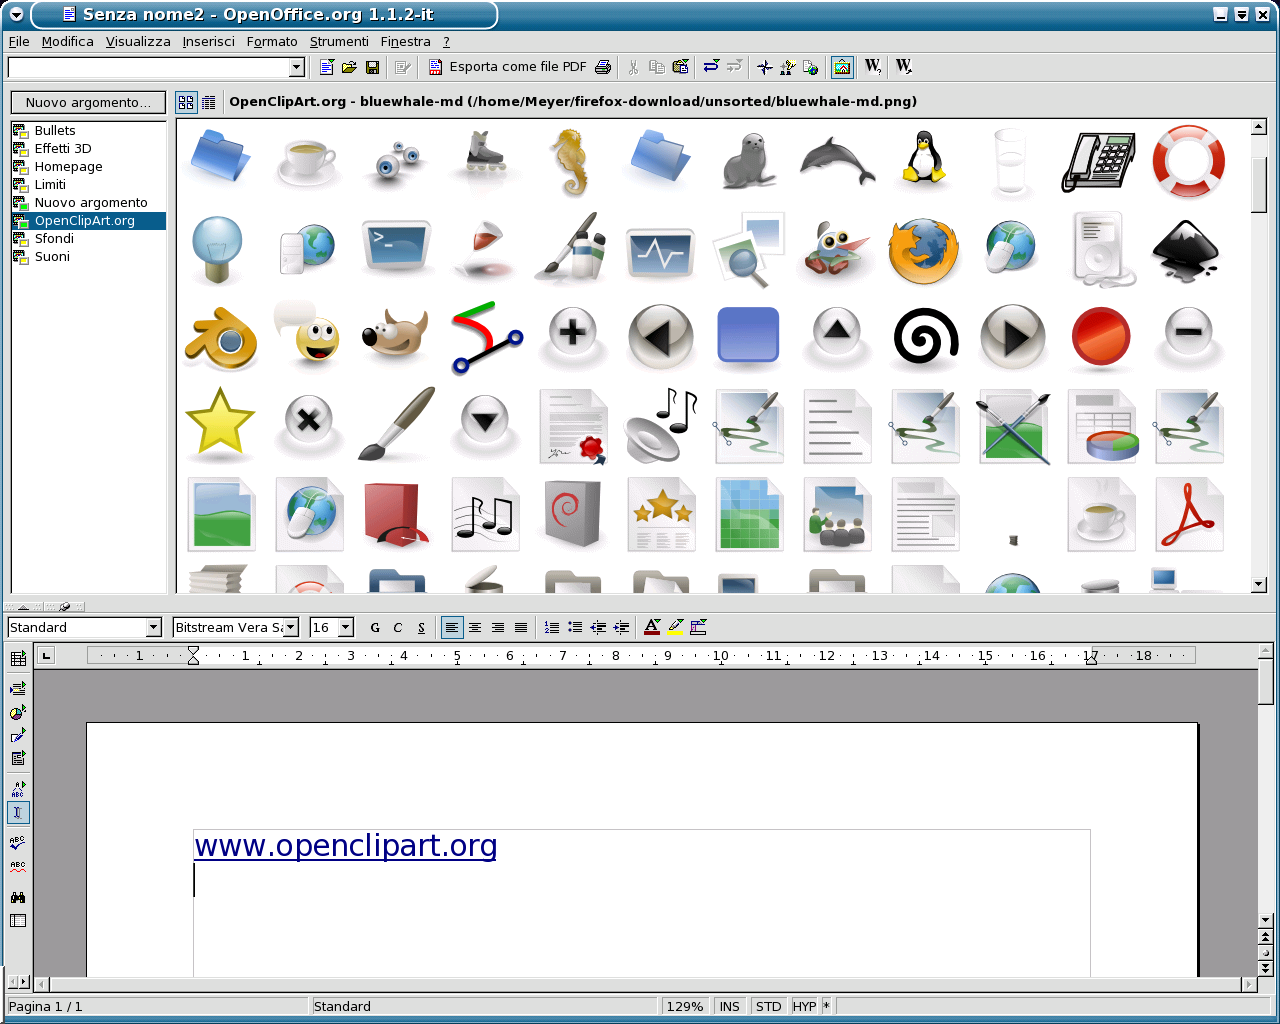 openoffice org for free